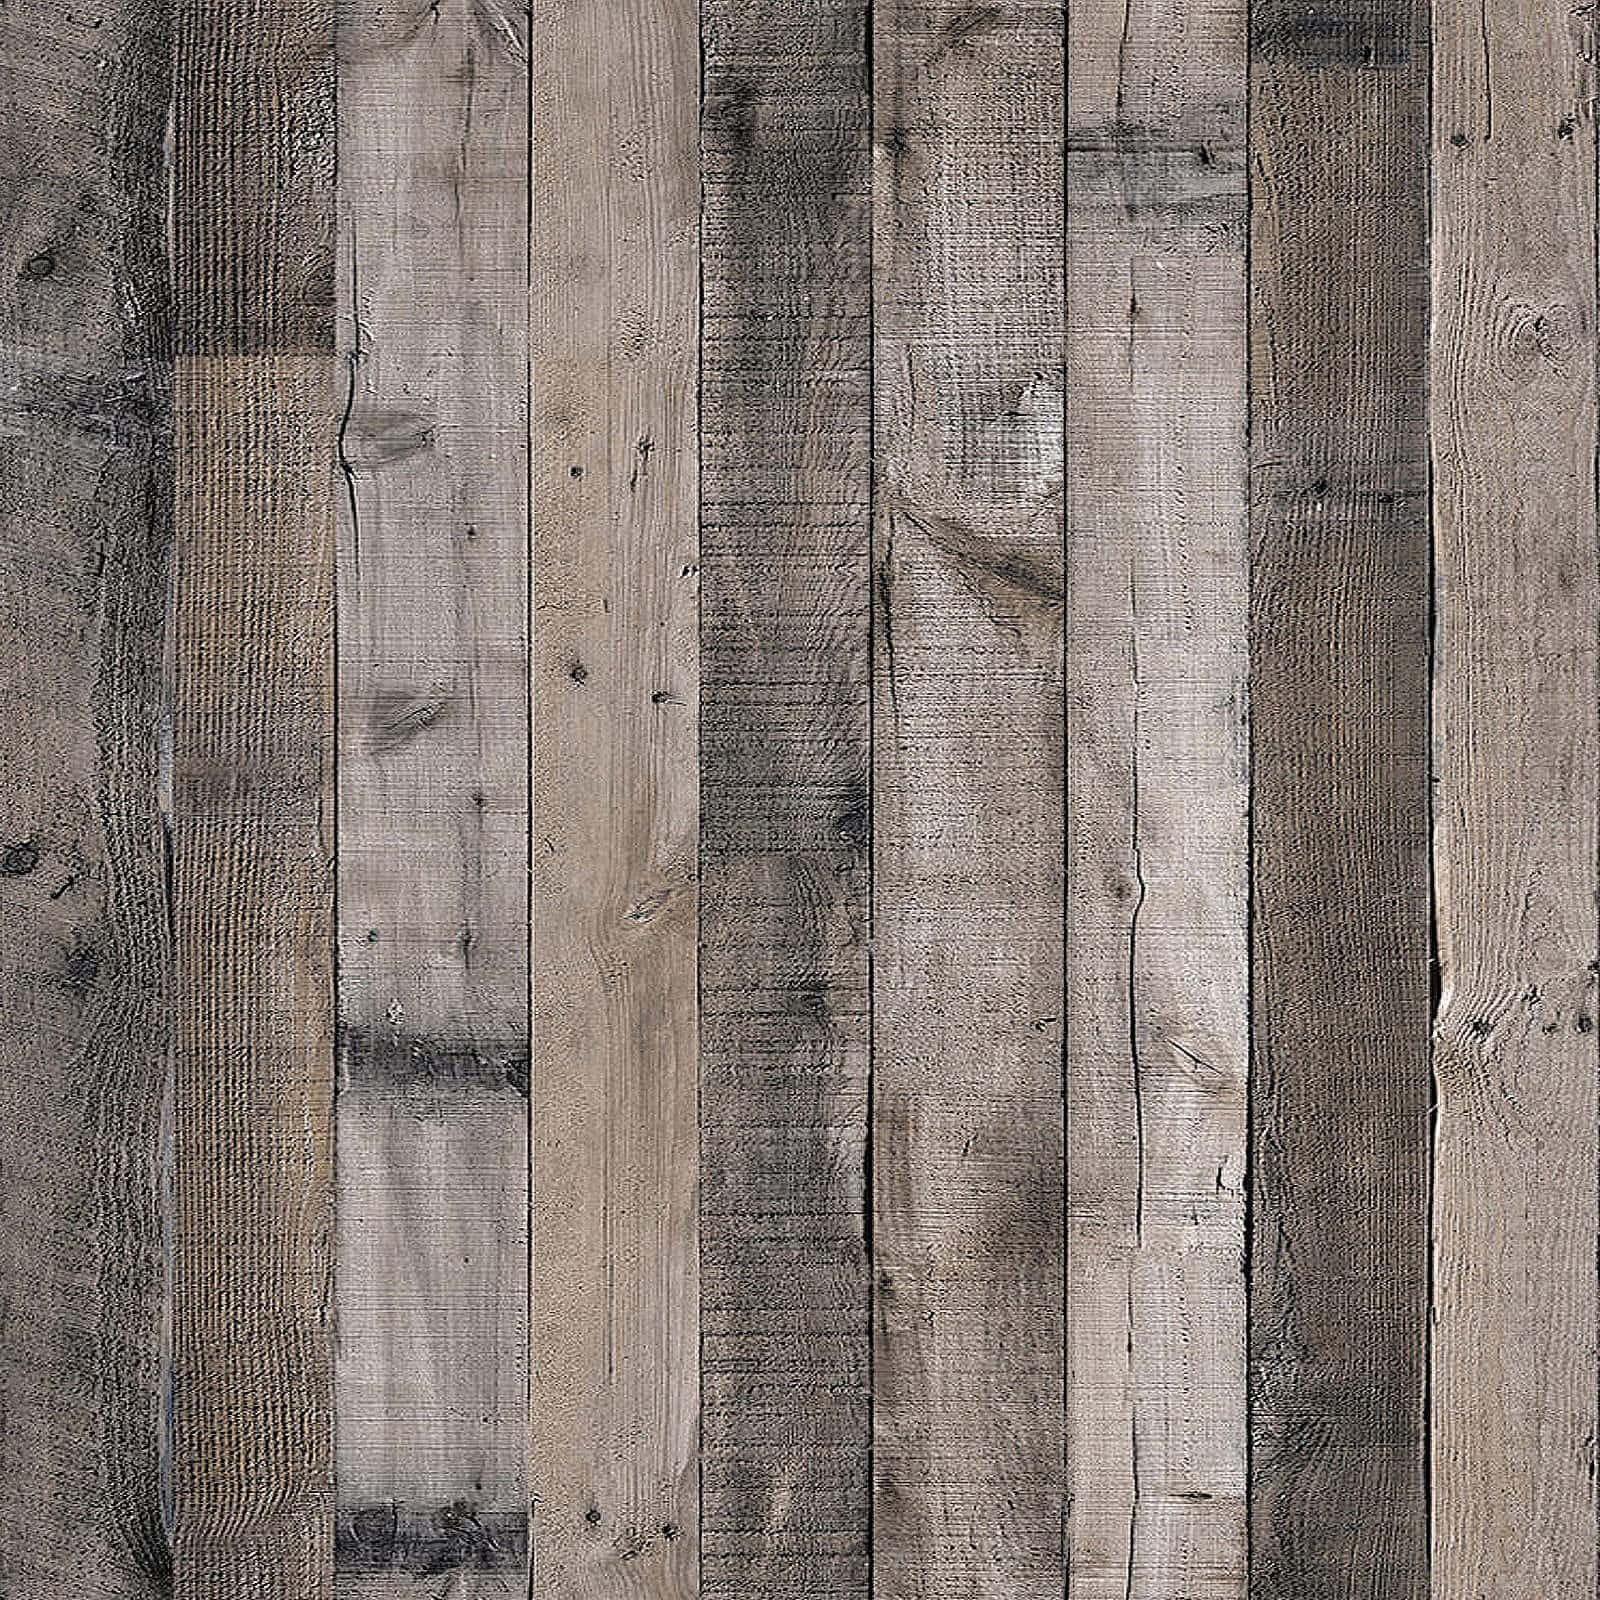 A Close Up Of A Wooden Wall With Gray And Brown Wood